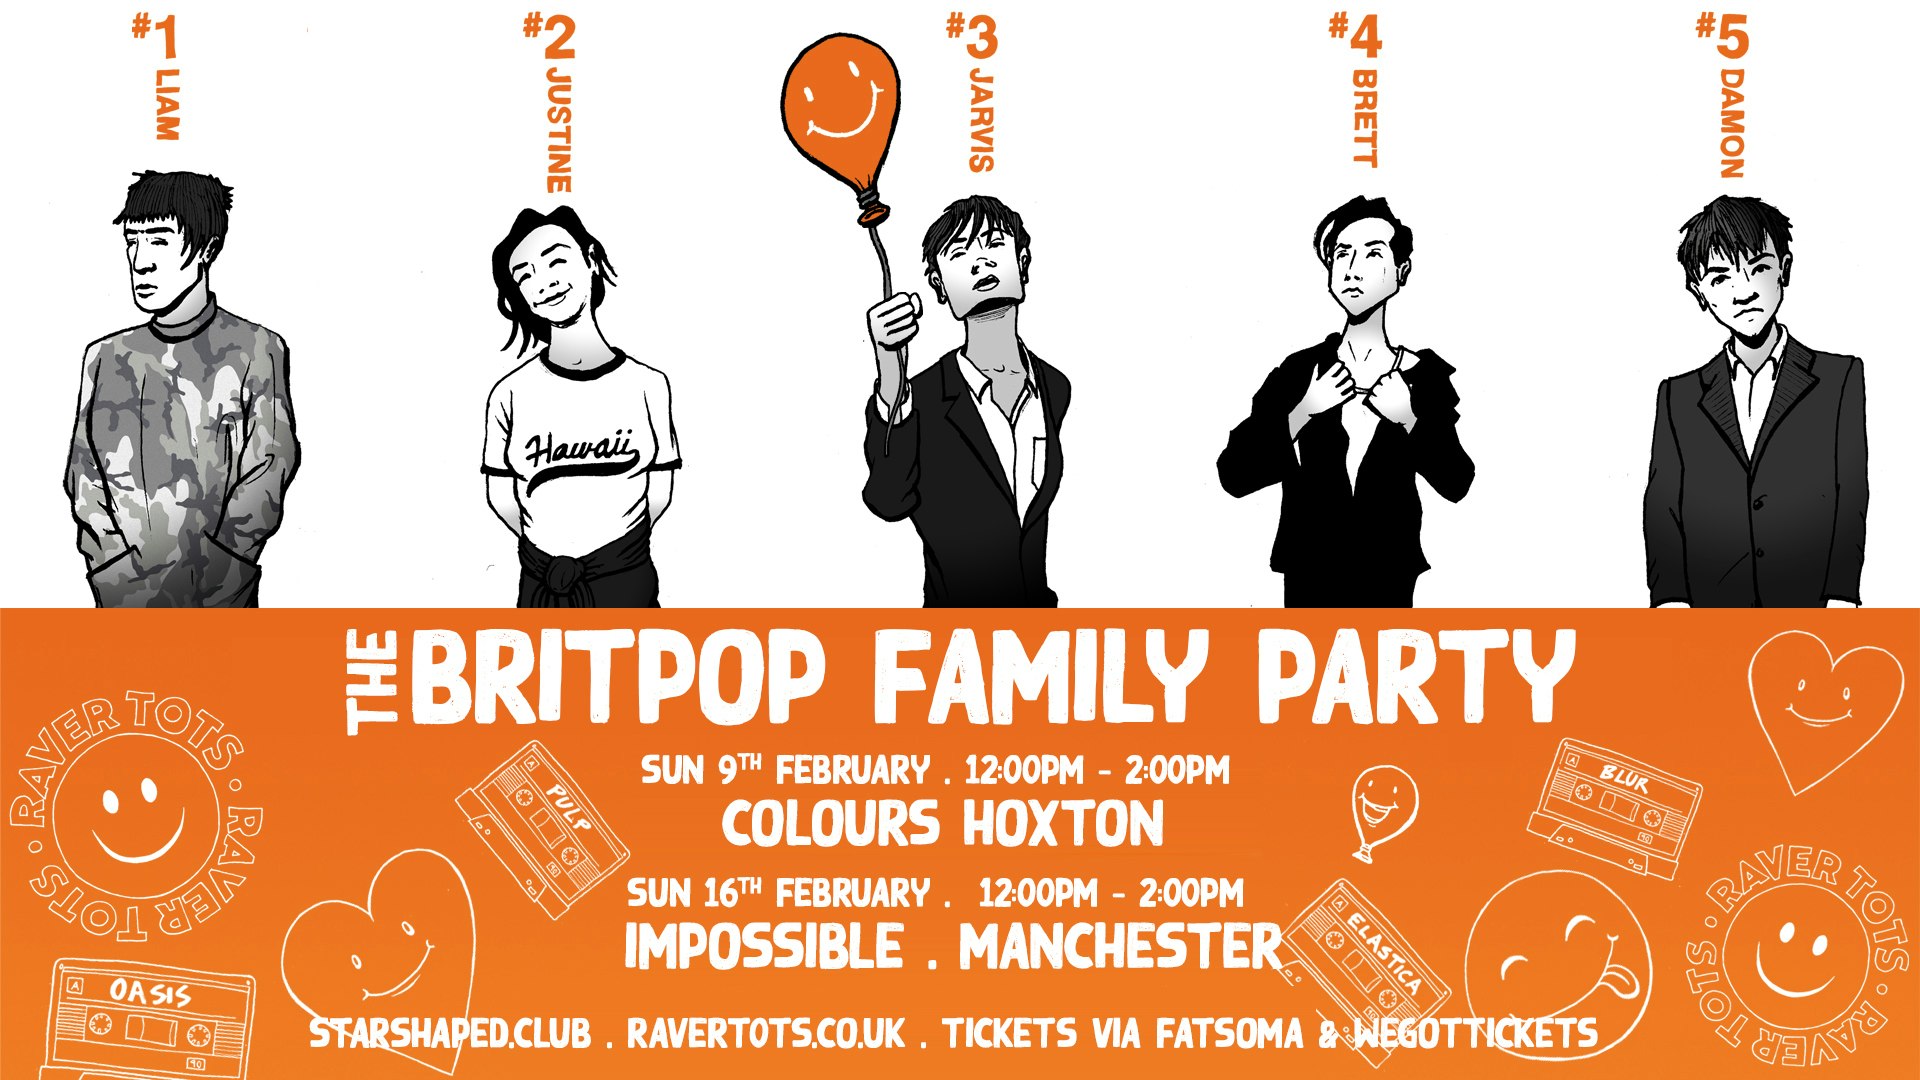 The Britpop Family Party